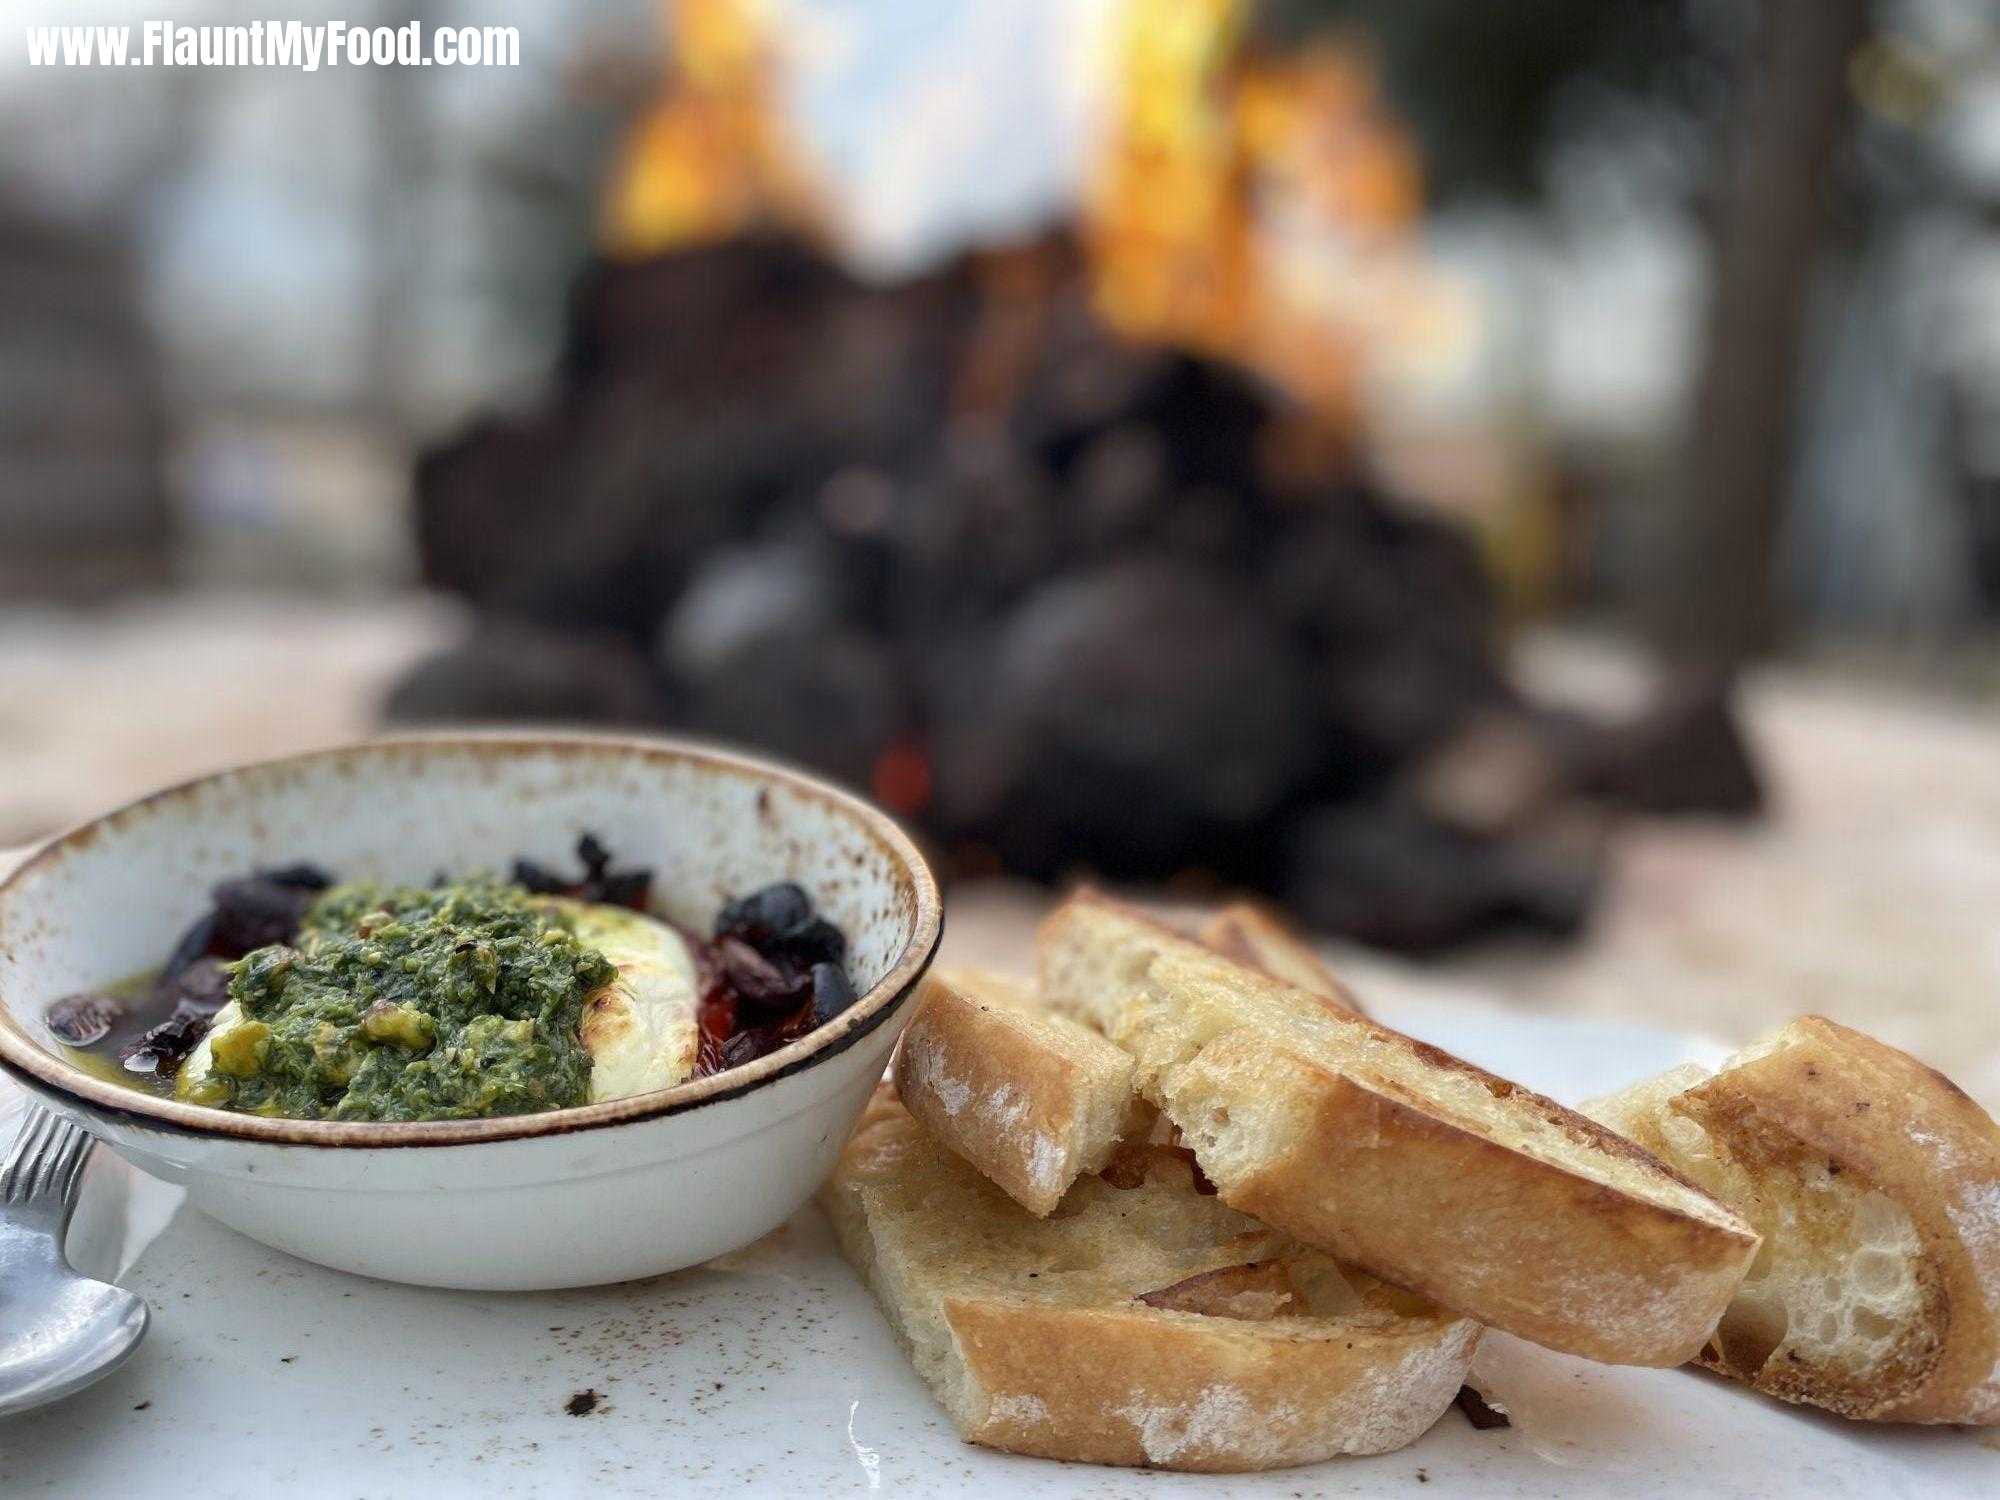 Baked goat cheese at press Cafe along the Trinity River in Fort Worth, TexasBaked goat cheese at press Cafe along the Trinity River near clear Fork Fort Worth, Texas toasted bread, delicious goat cheese with olives and a nice warm fire in the winter cold month of January 2024.